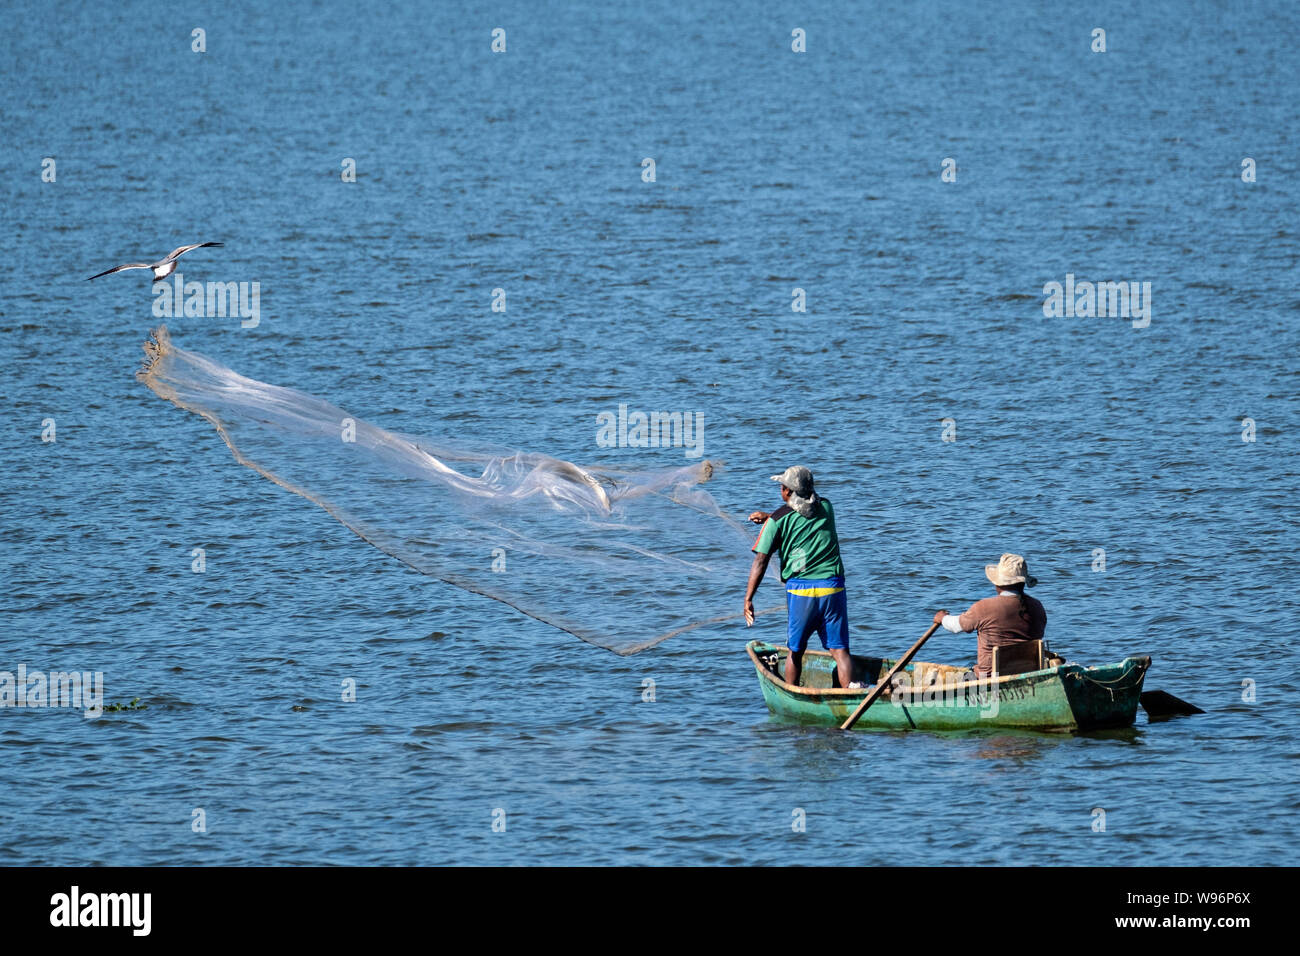 Fishermen use a cast net at Lake Catemaco in Catemaco, Veracruz, Mexico. The tropical freshwater lake at the center of the Sierra de Los Tuxtlas, is a popular tourist destination and known for free ranging monkeys, the rainforest backdrop and Mexican witches known as Brujos. Stock Photo